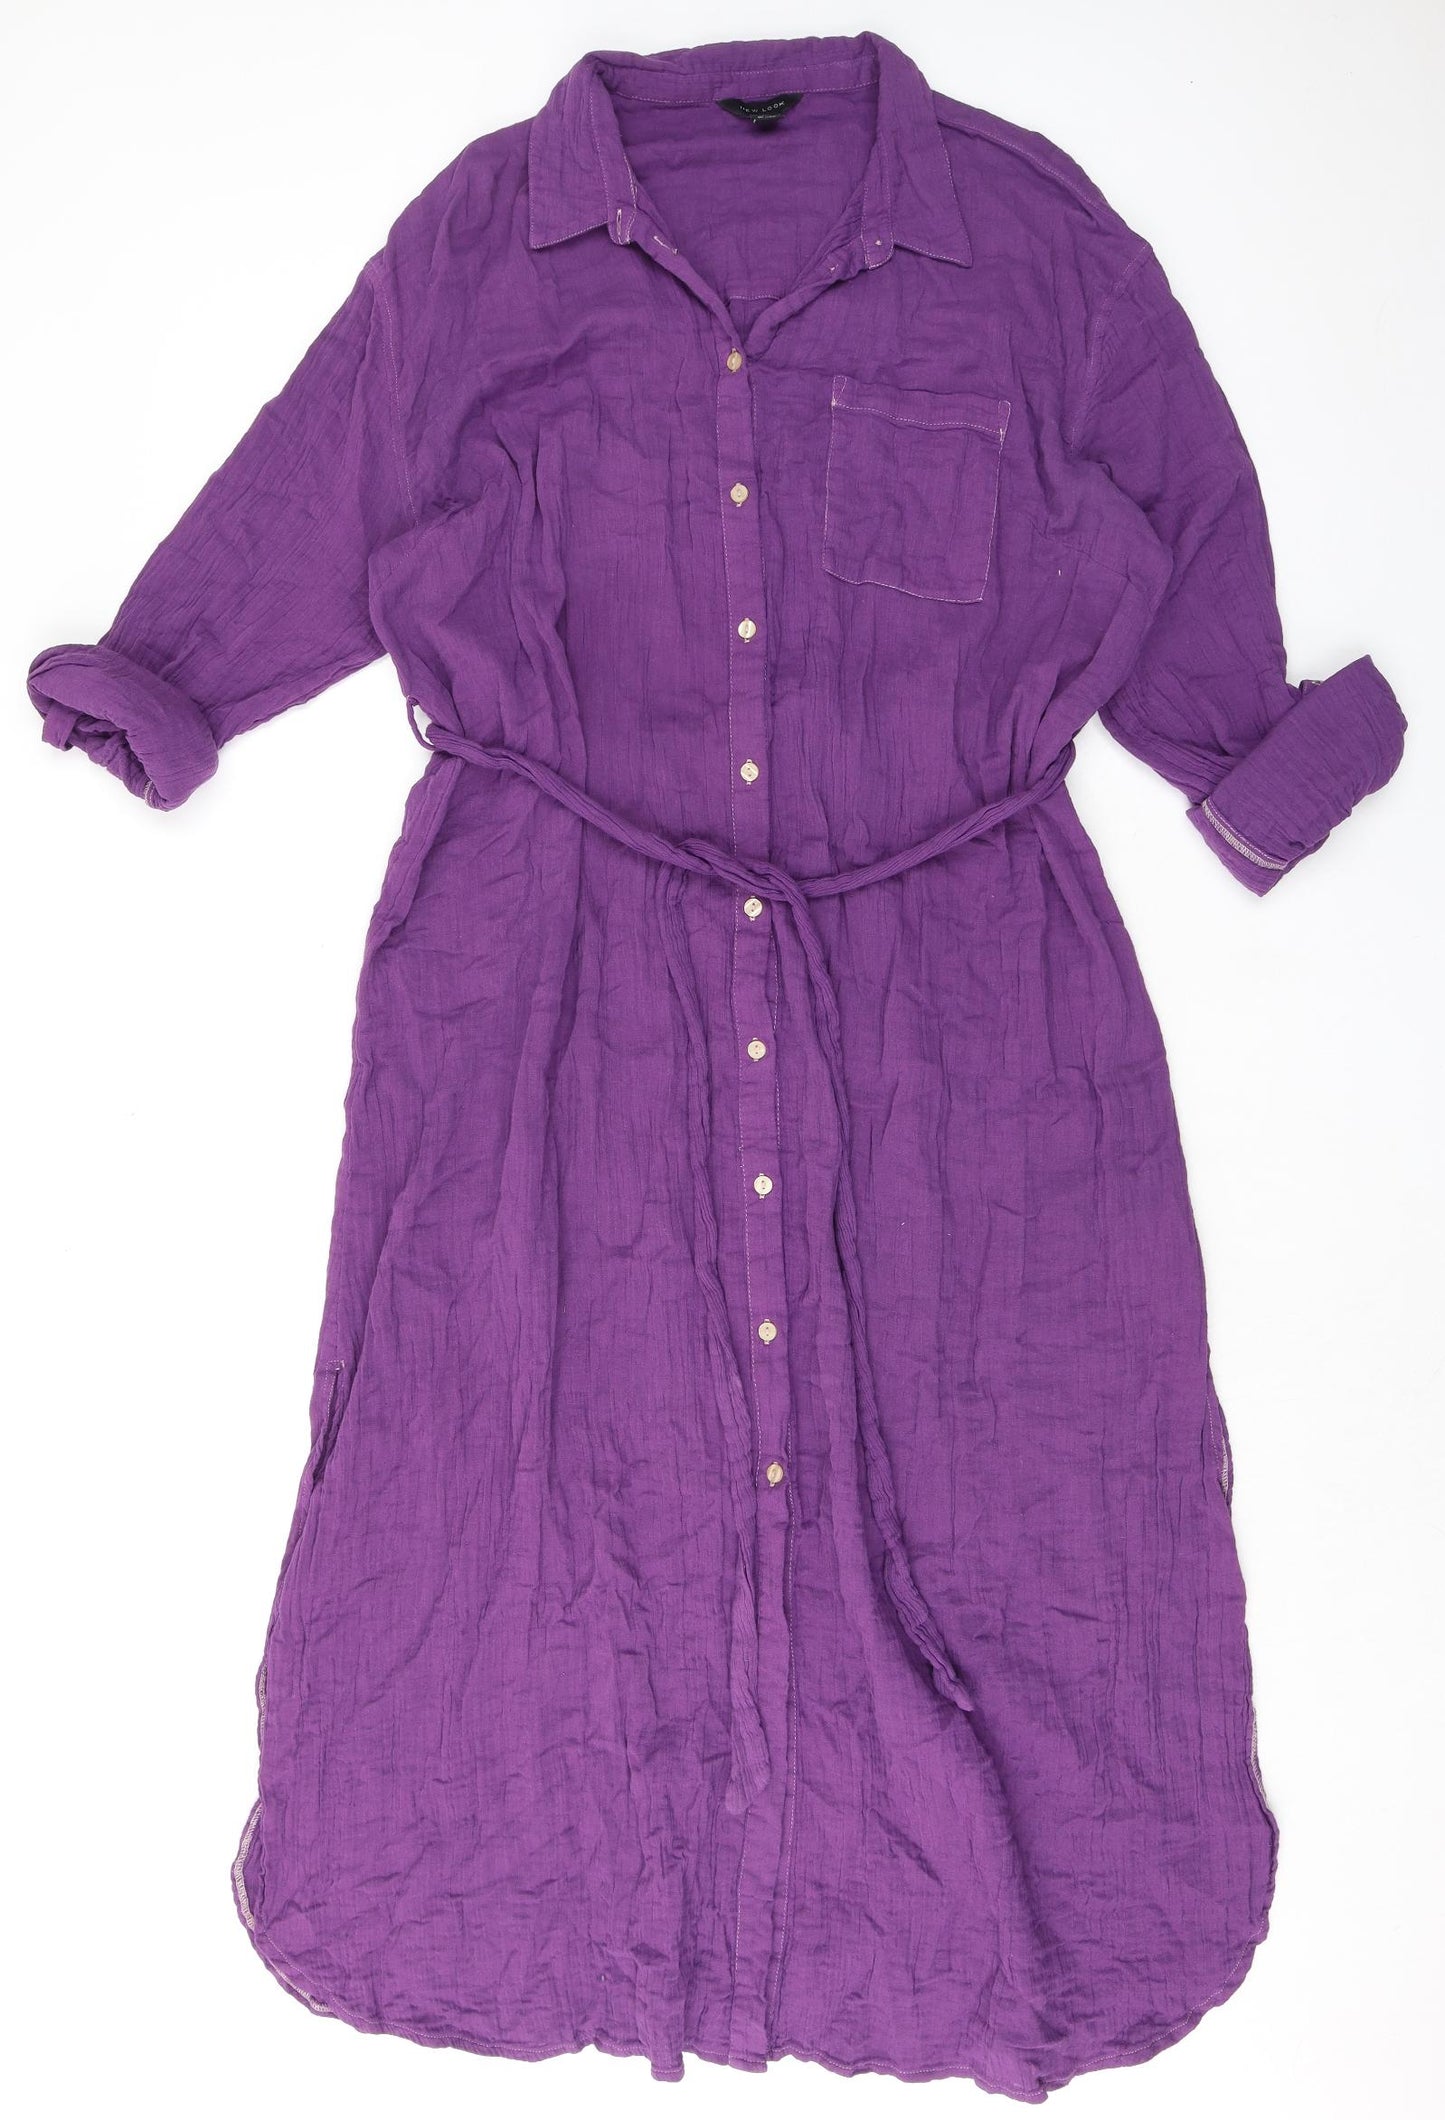 New Look Womens Purple 100% Cotton Shirt Dress Size 18 Collared Button